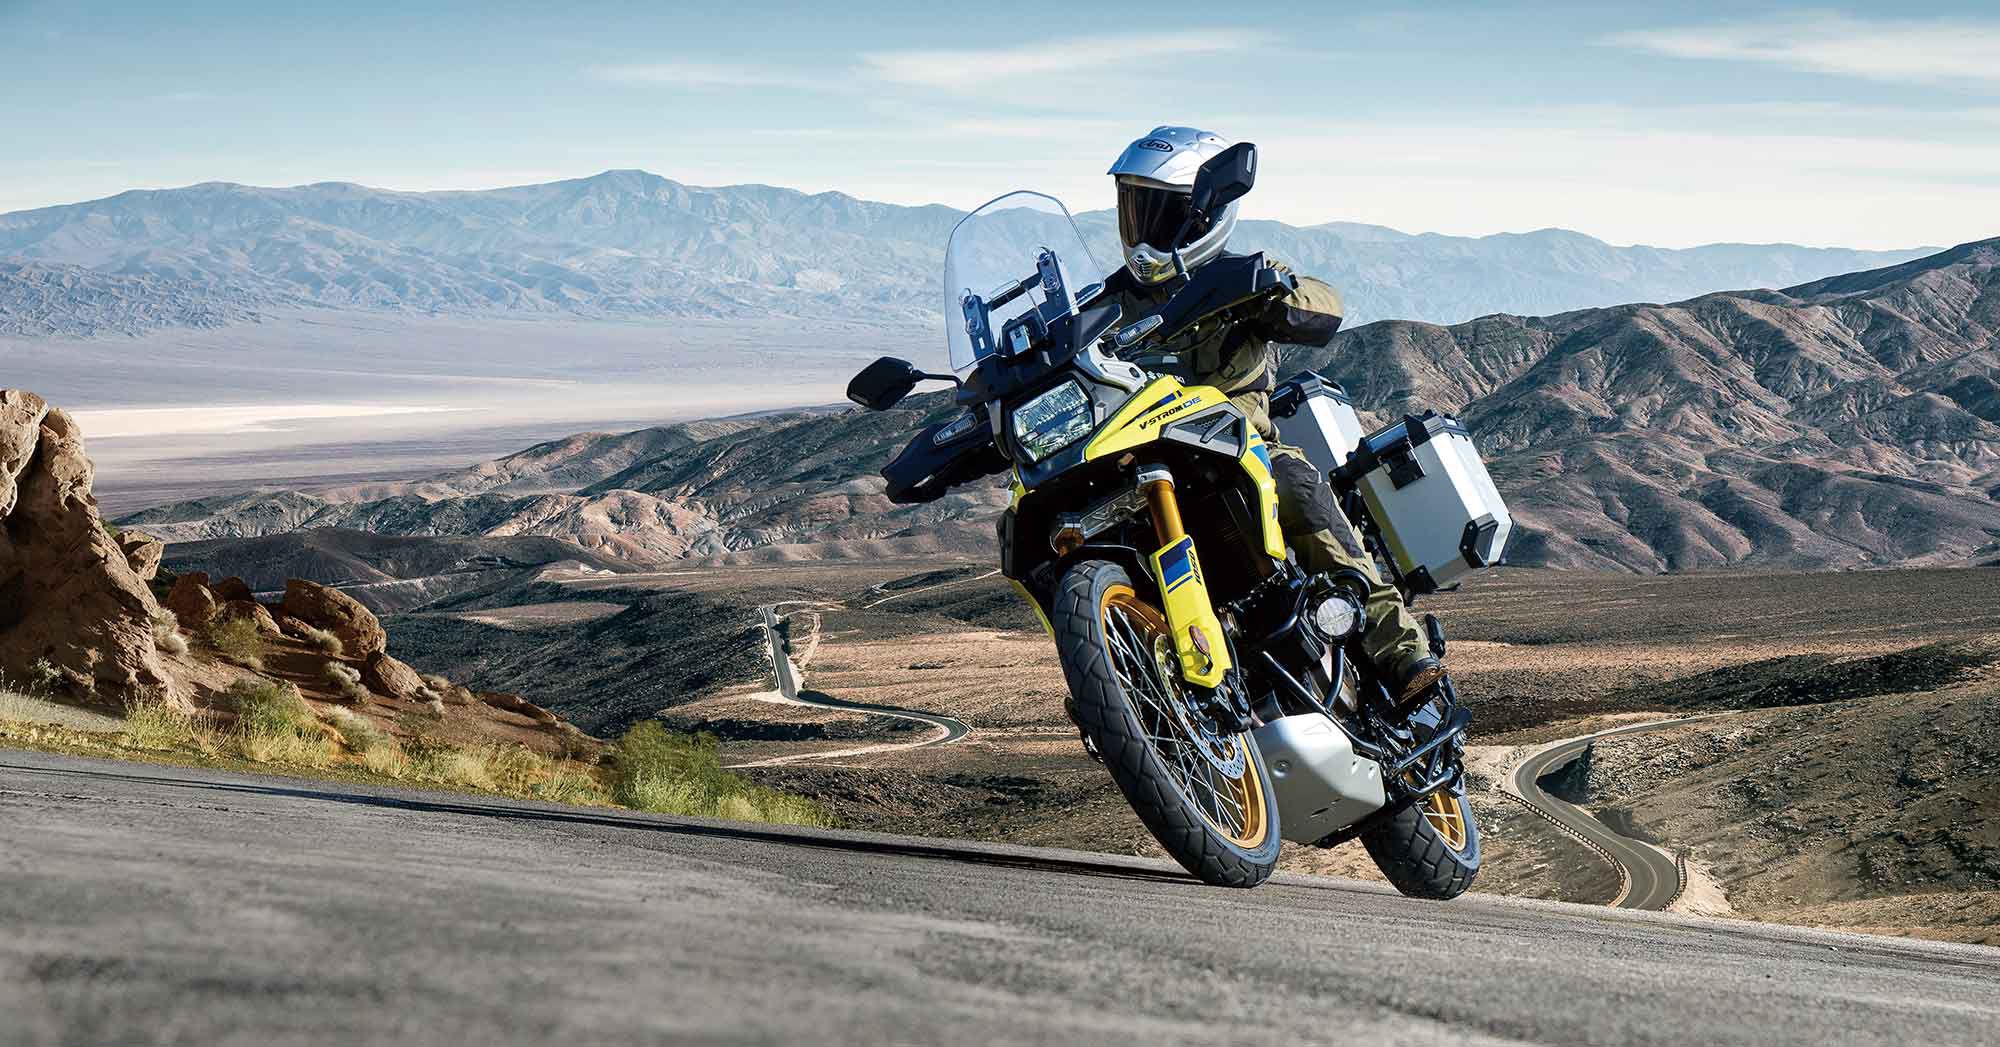 The 2023 Suzuki V-Strom 1050DE Adventure is one of the most sophisticated V-Stroms to date.